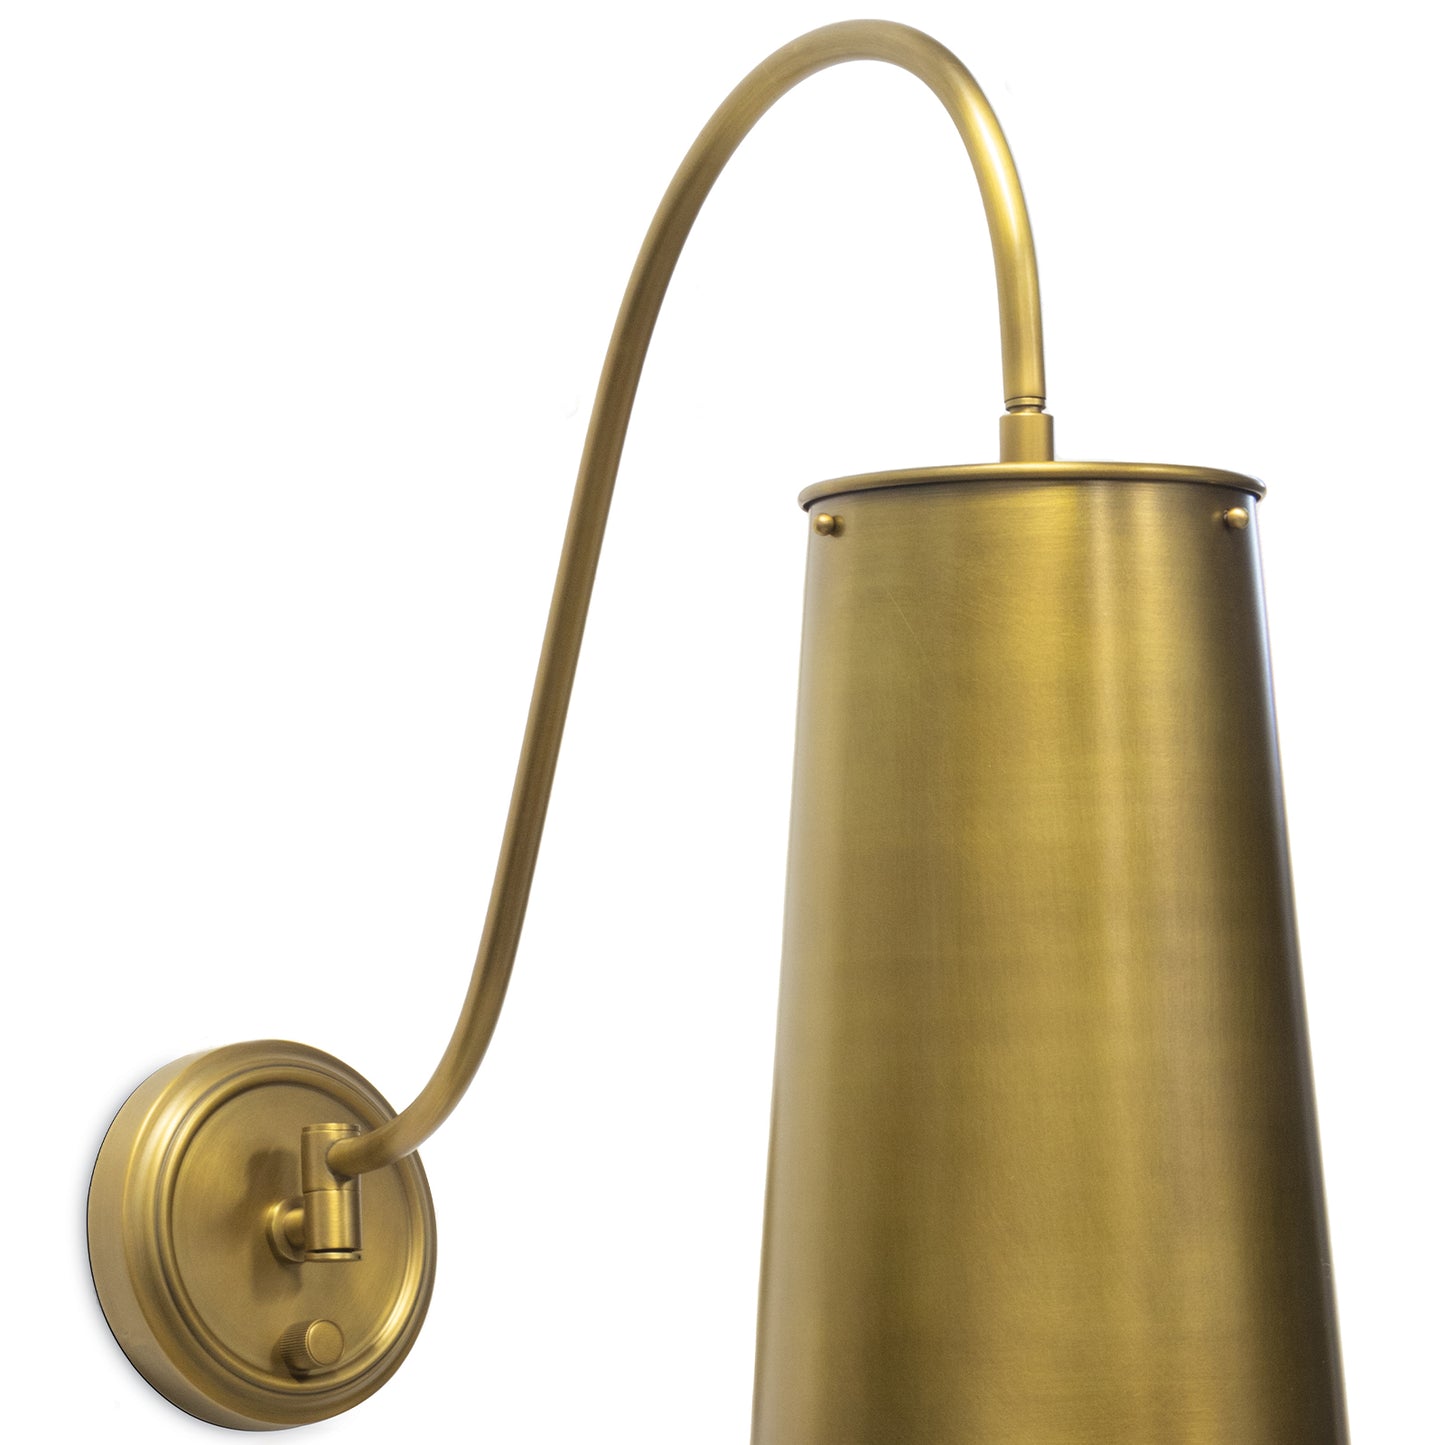 Hattie Sconce in Natural Brass by Southern Living